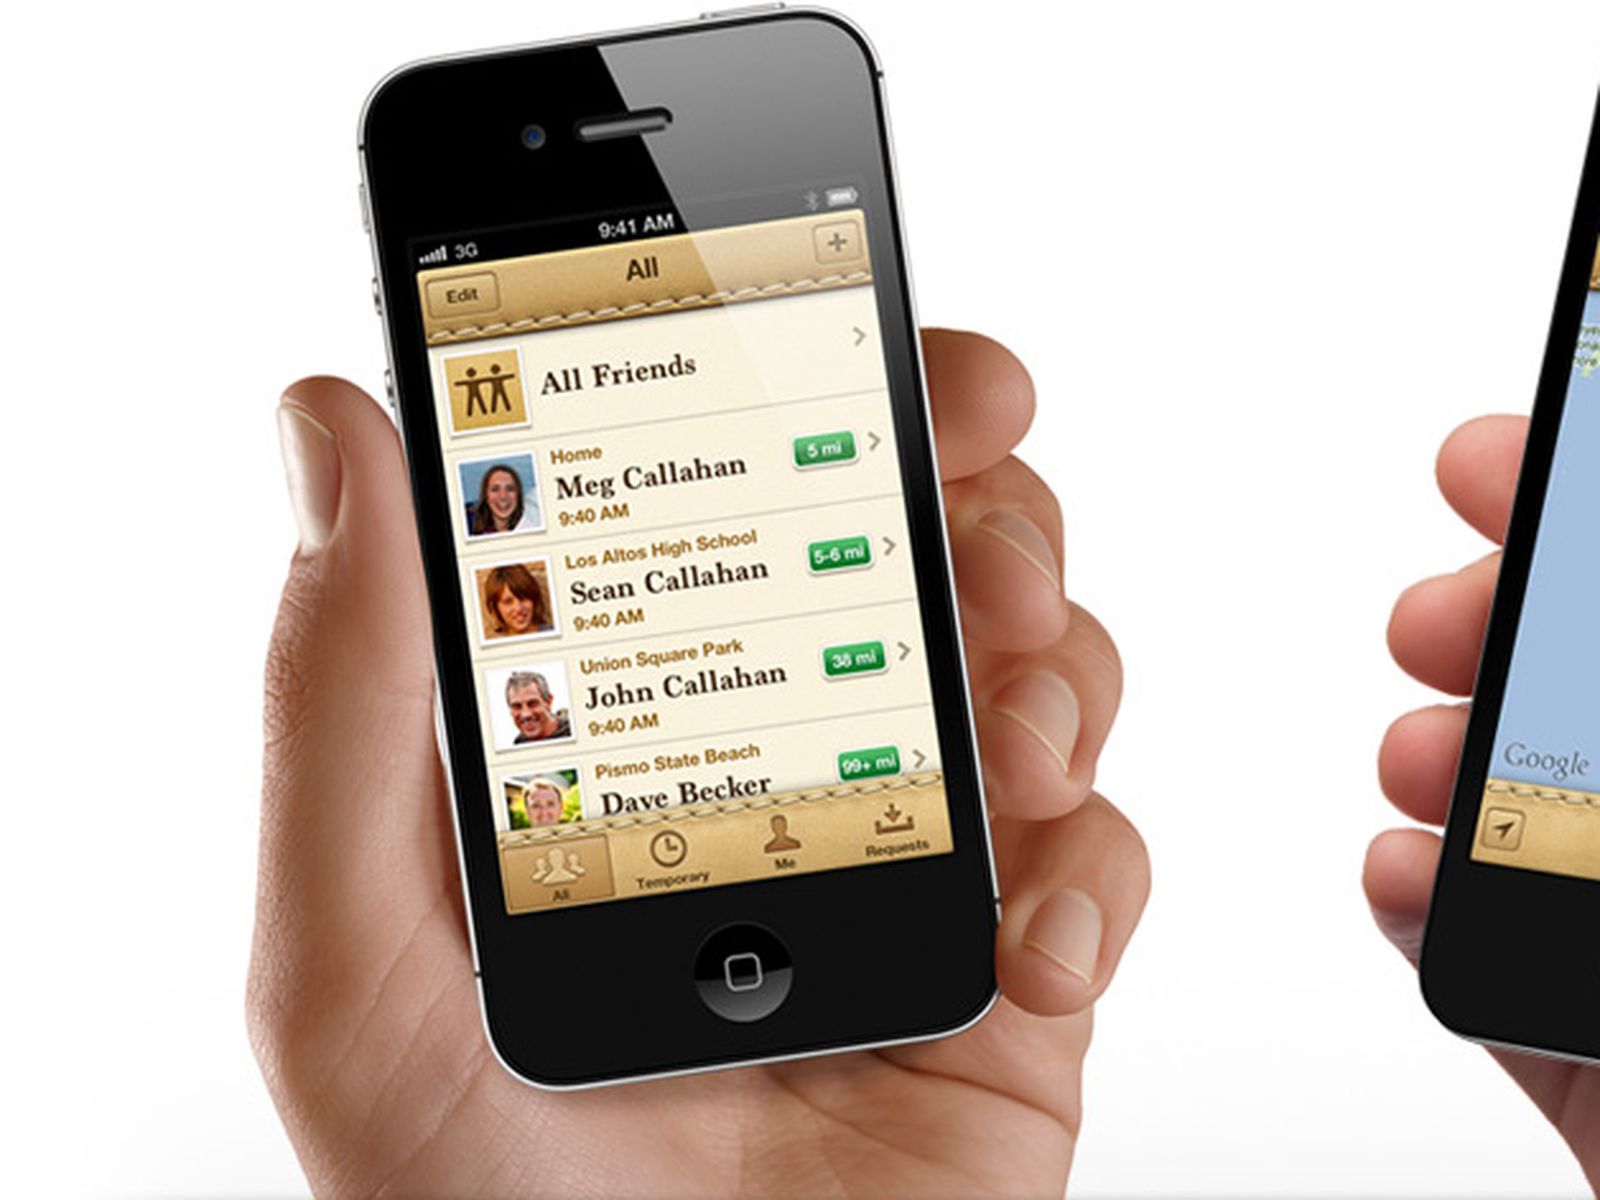 Find My Friends on the App Store